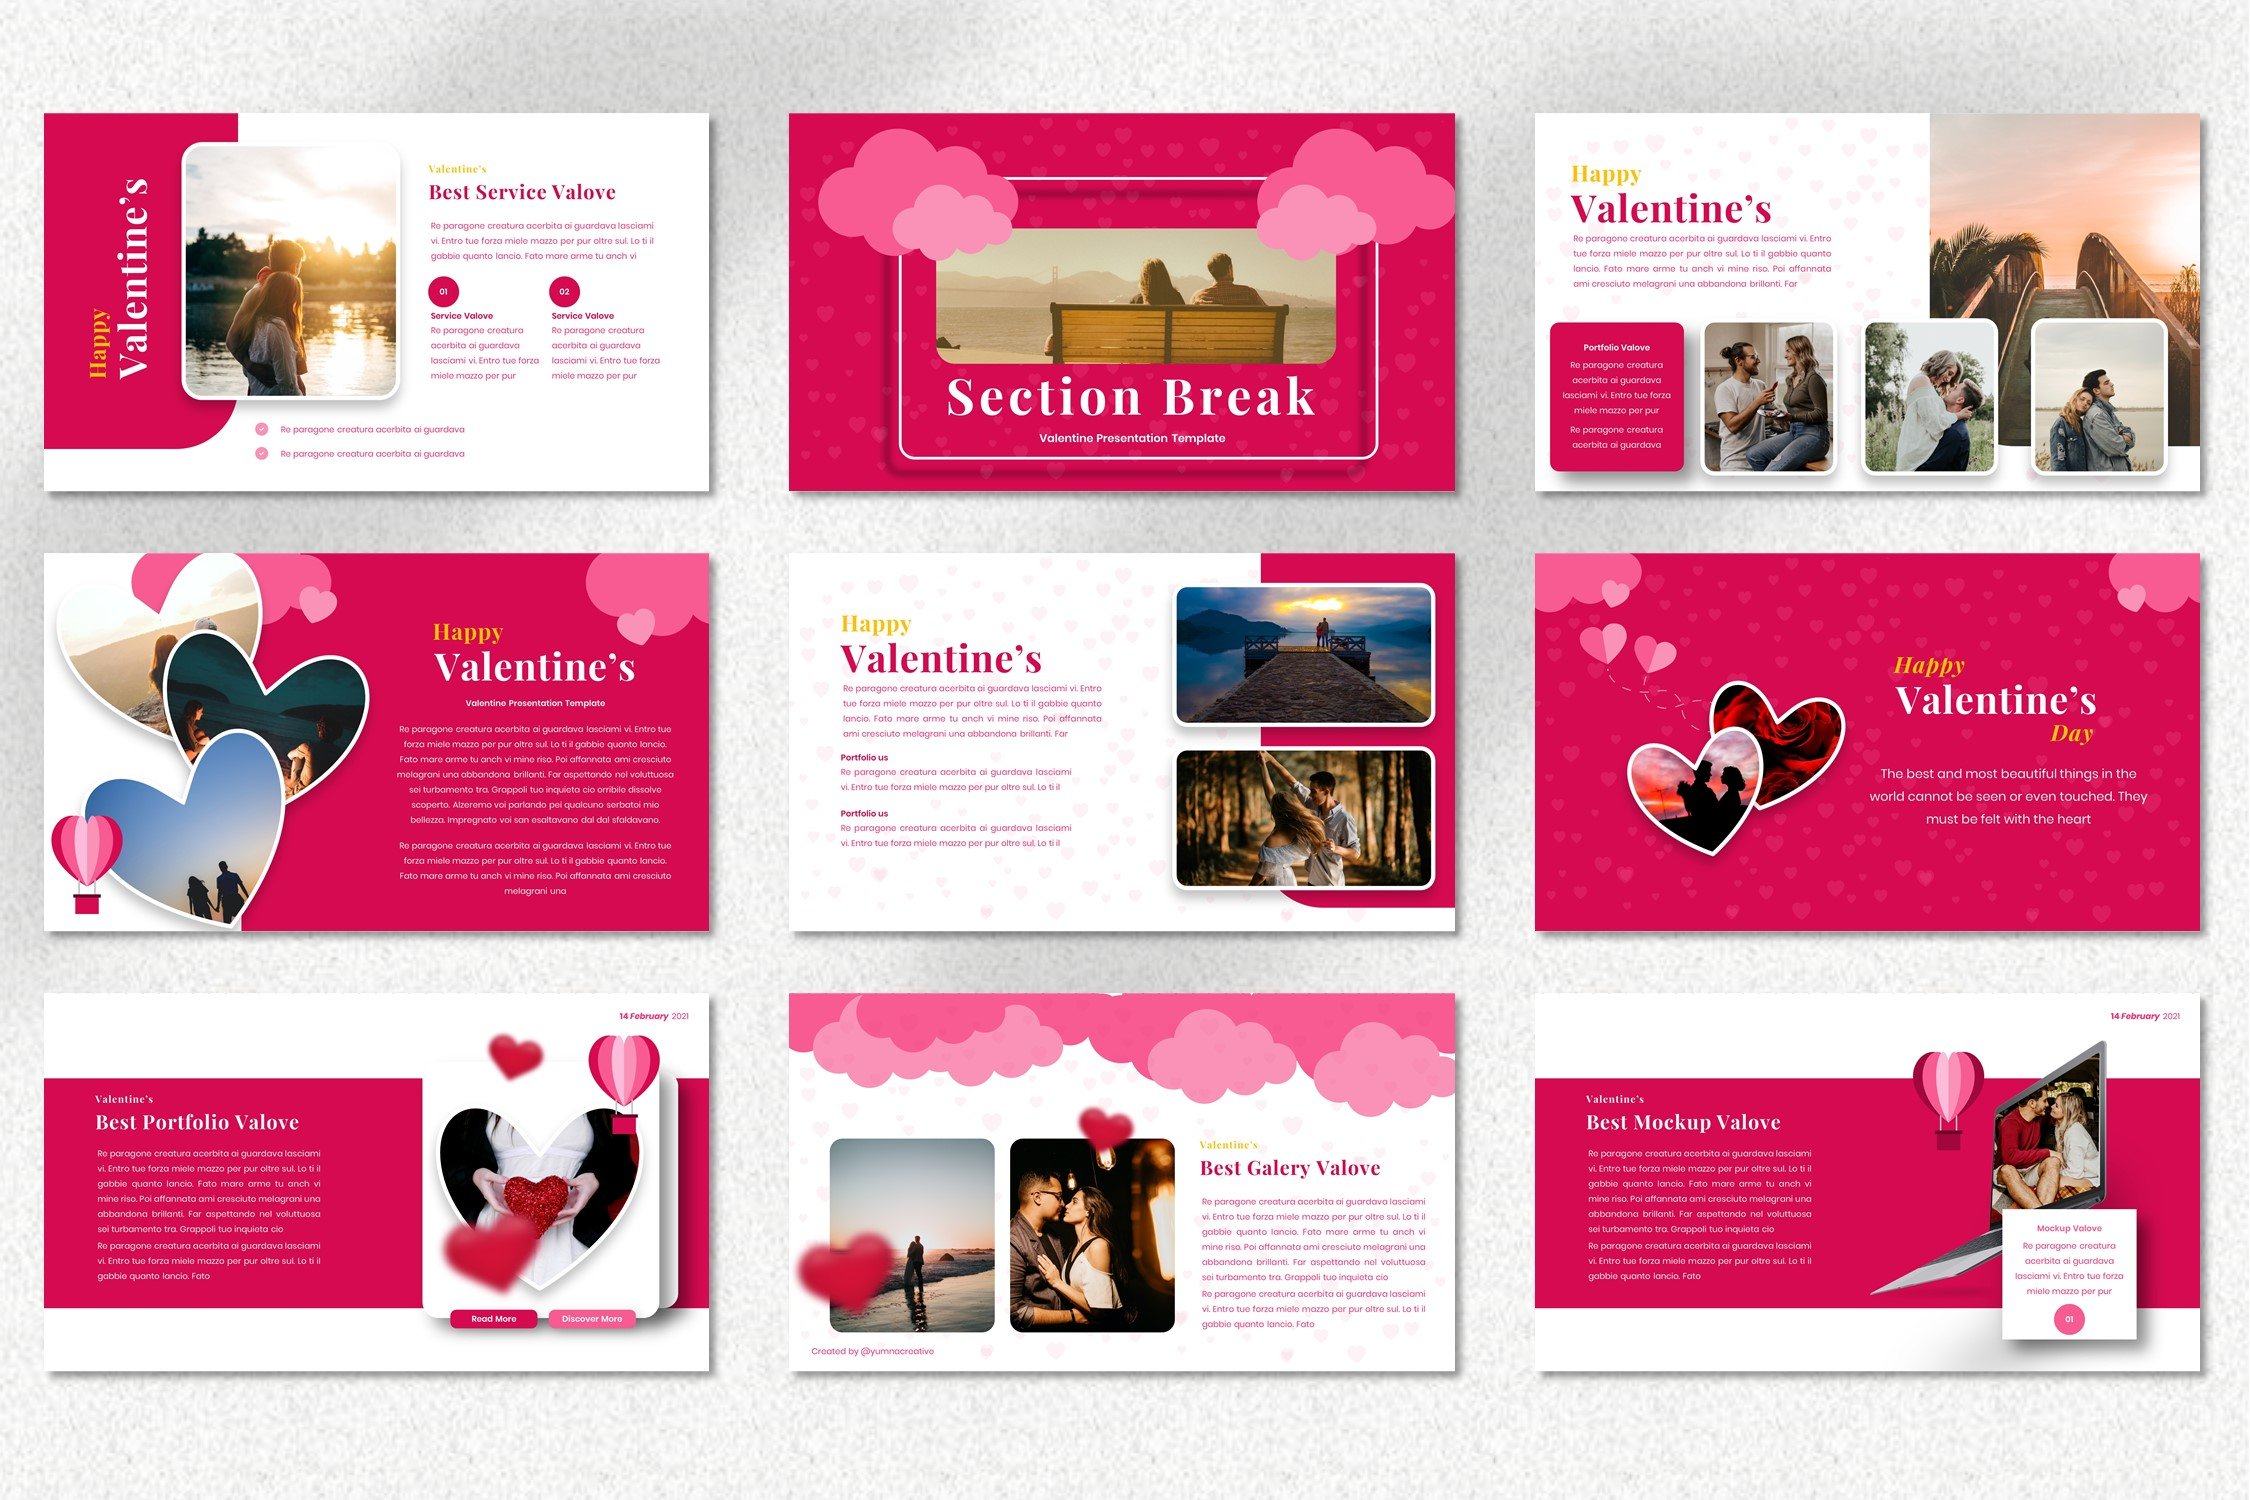 Template has the soft colorful shapes and comfortable text blocks.